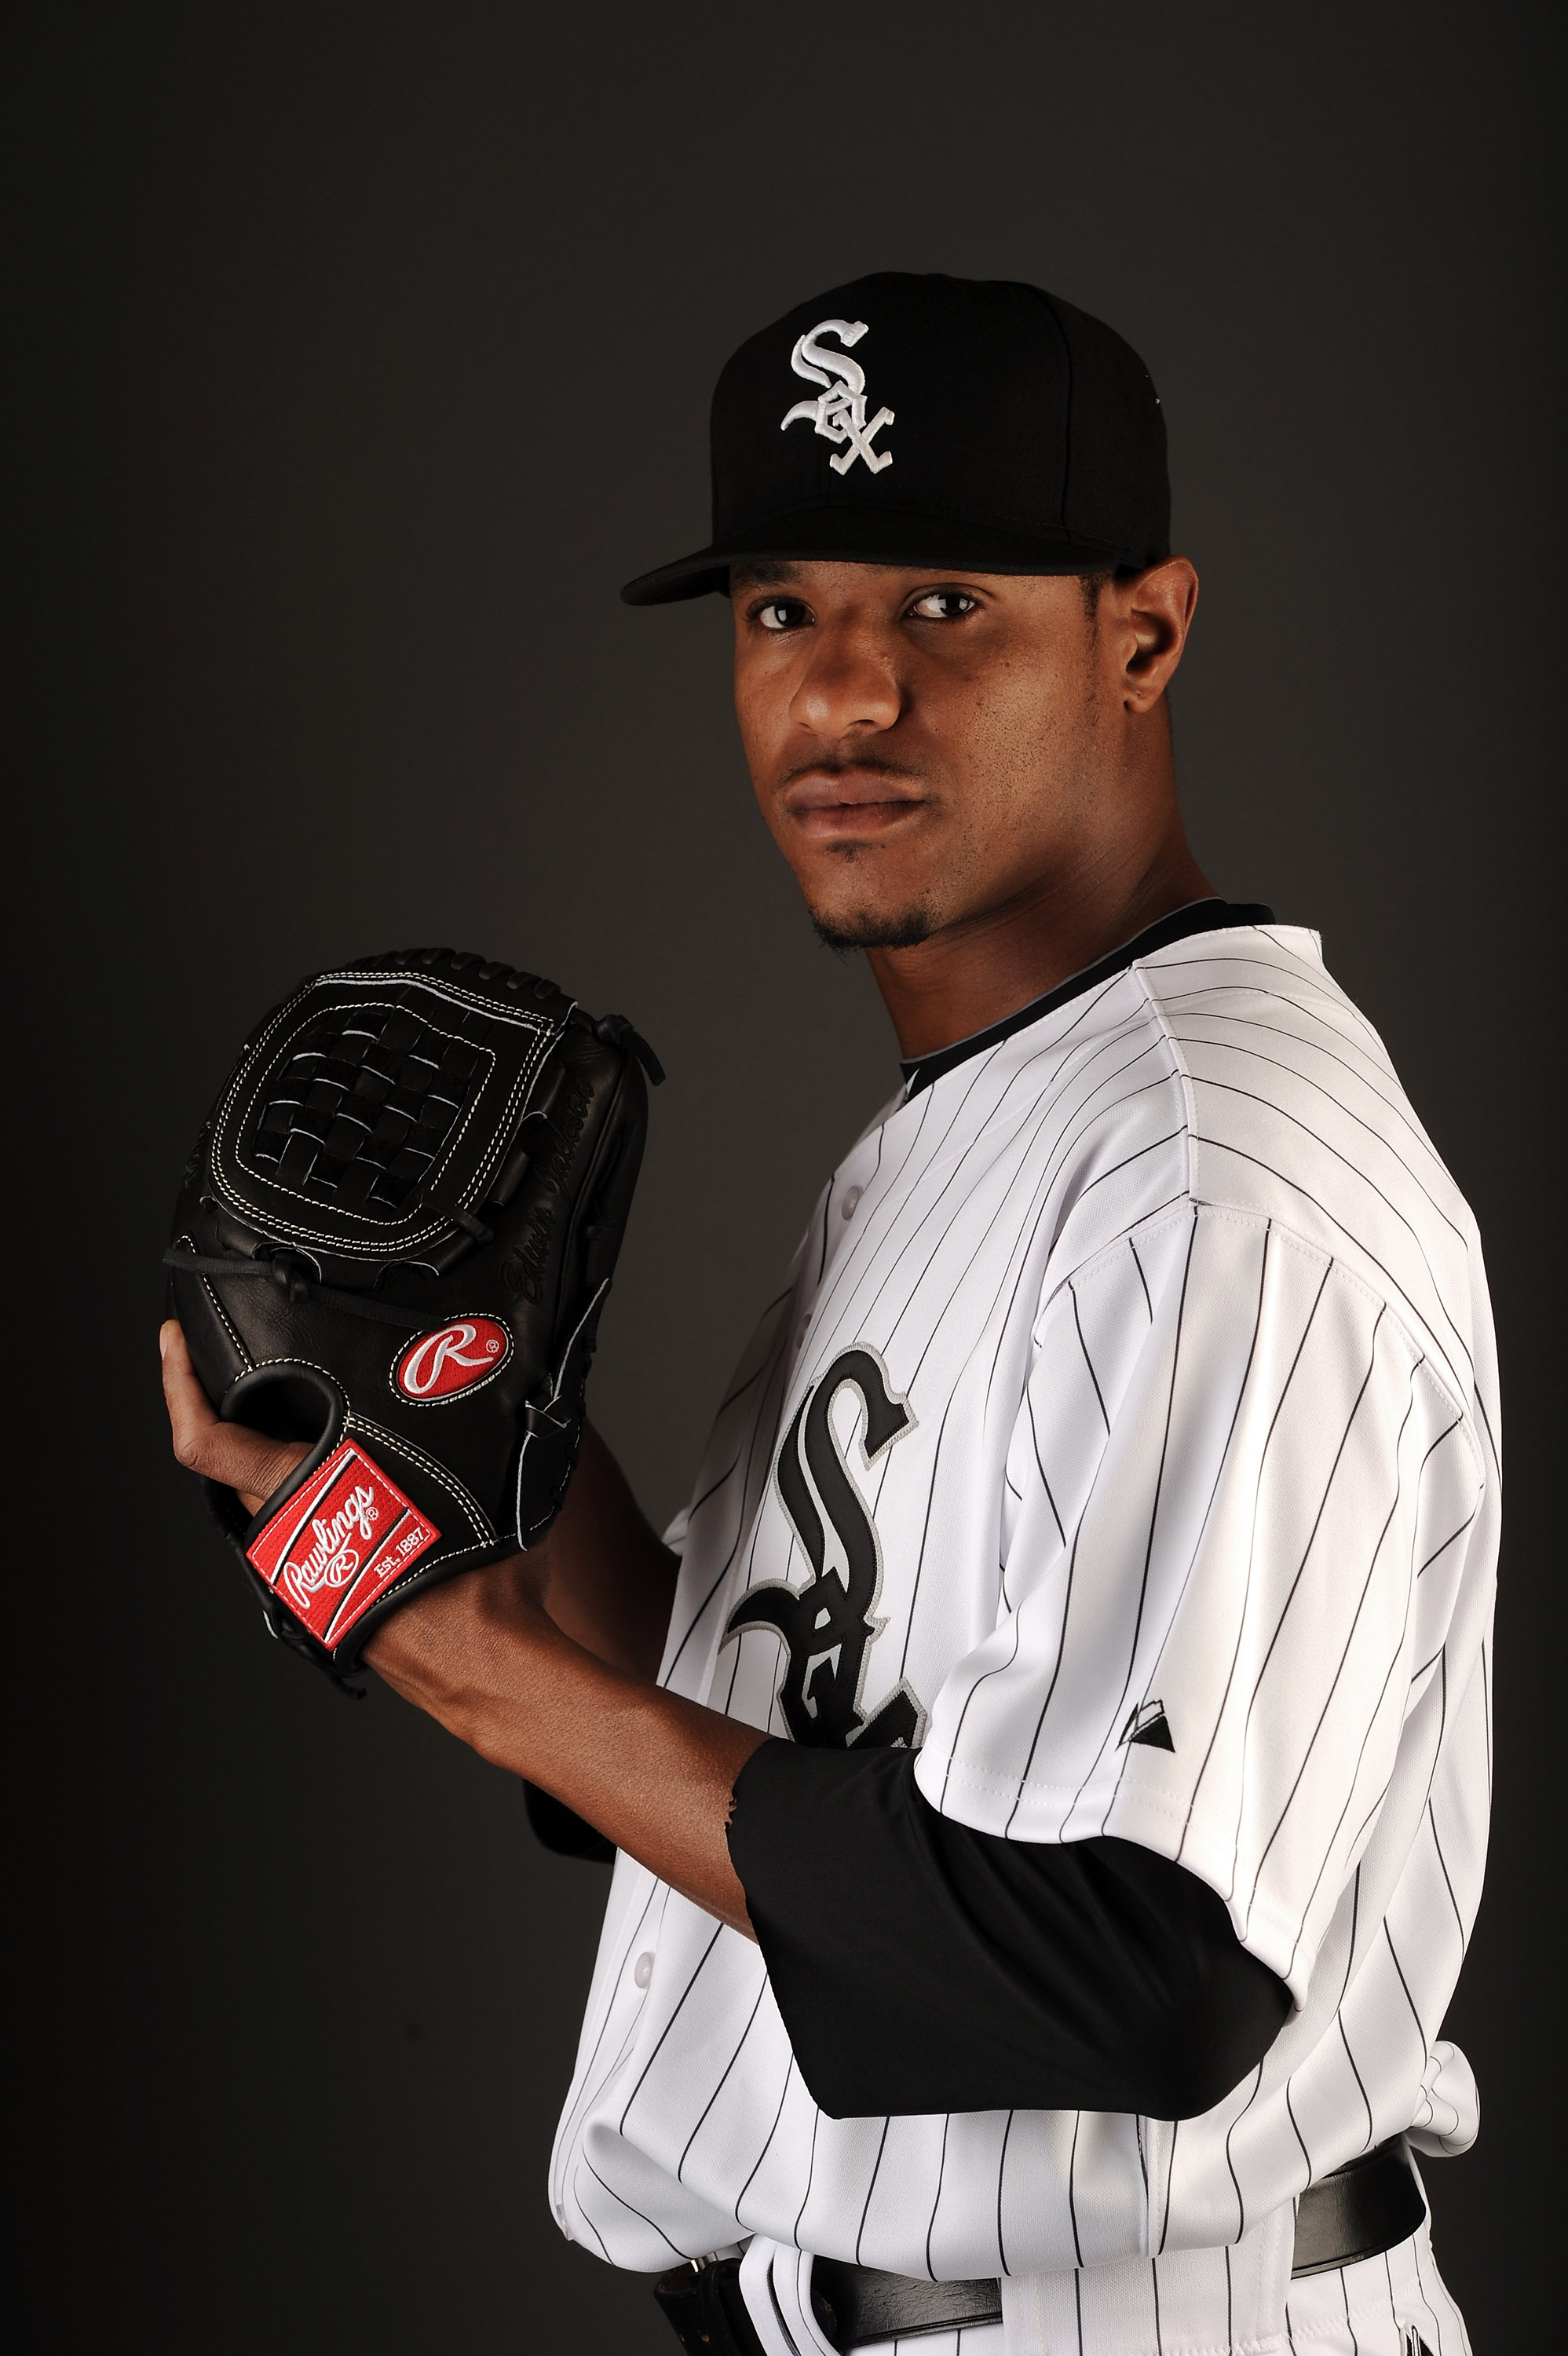 GLENDALE, AZ - FEBRUARY 26:  Edwin Jackson #33 of the Chicago White Sox poses for a photo on photo day at Camelback Ranch on February 26, 2011 in Glendale, Arizona.  (Photo by Harry How/Getty Images)